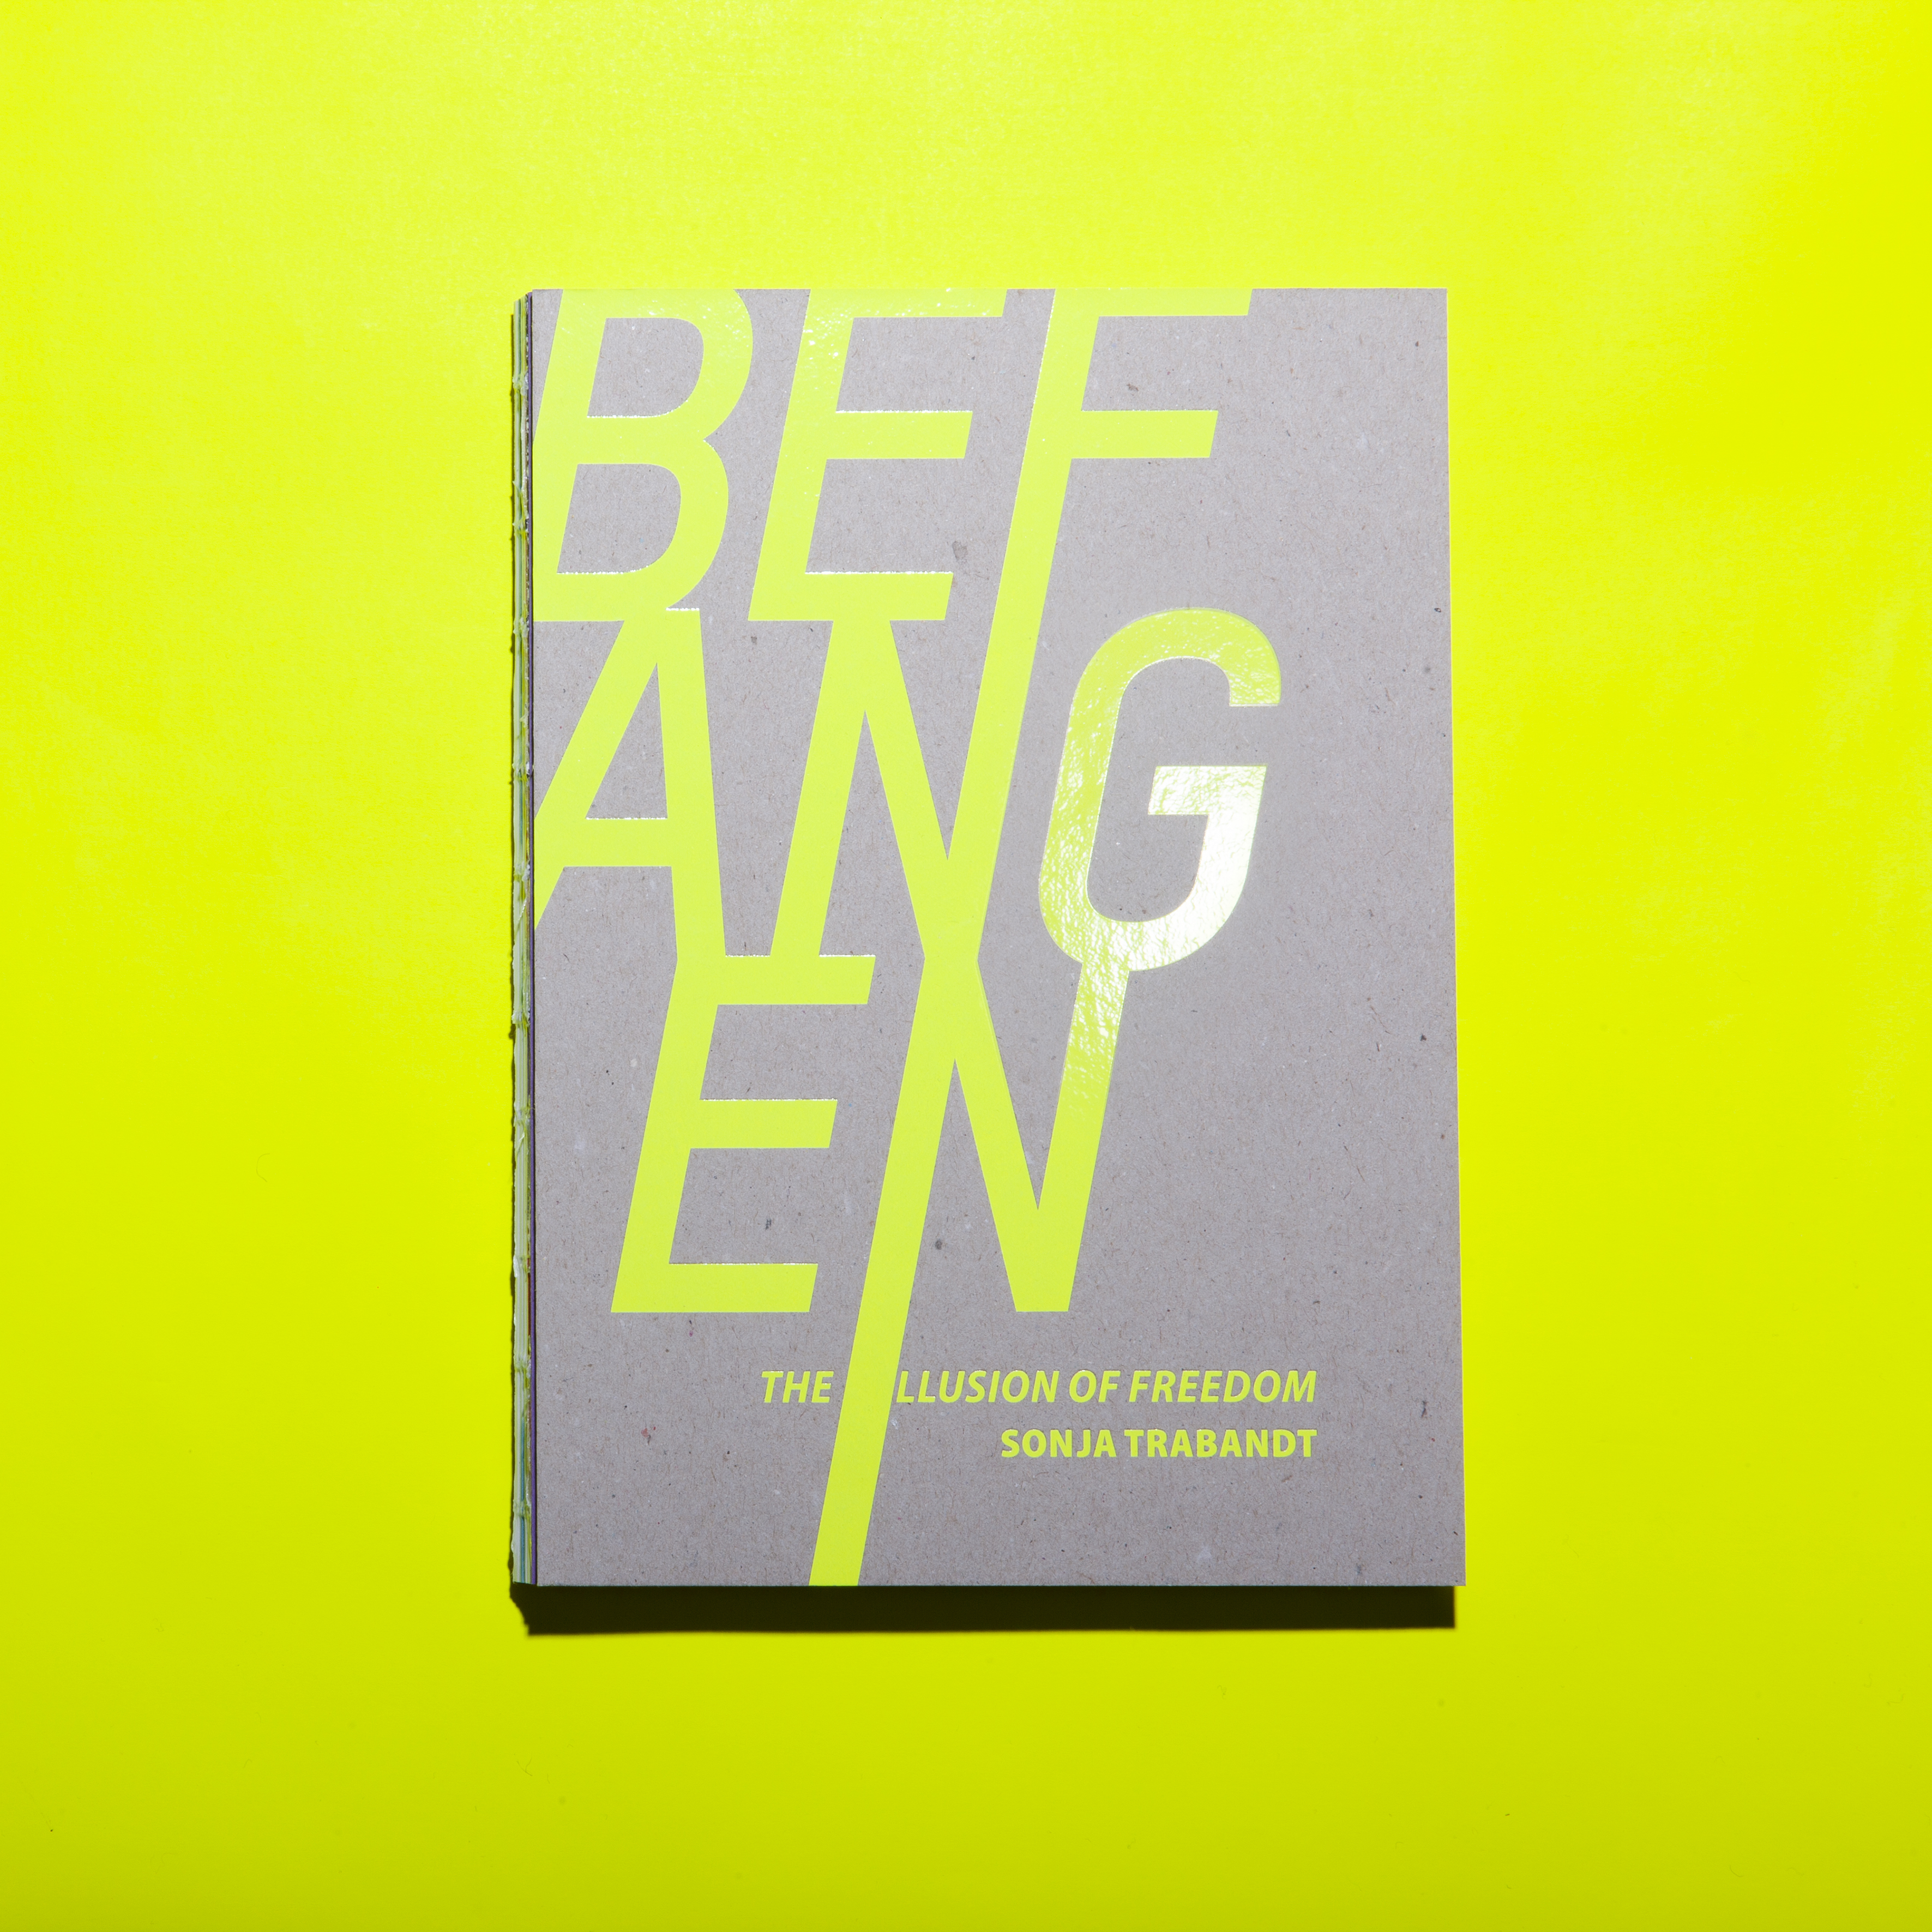 cover of the photobook befangen-the illusion of freedom, it is neon yellow print of the title and author Sonja Trabandt on grey cardboard with an open binding